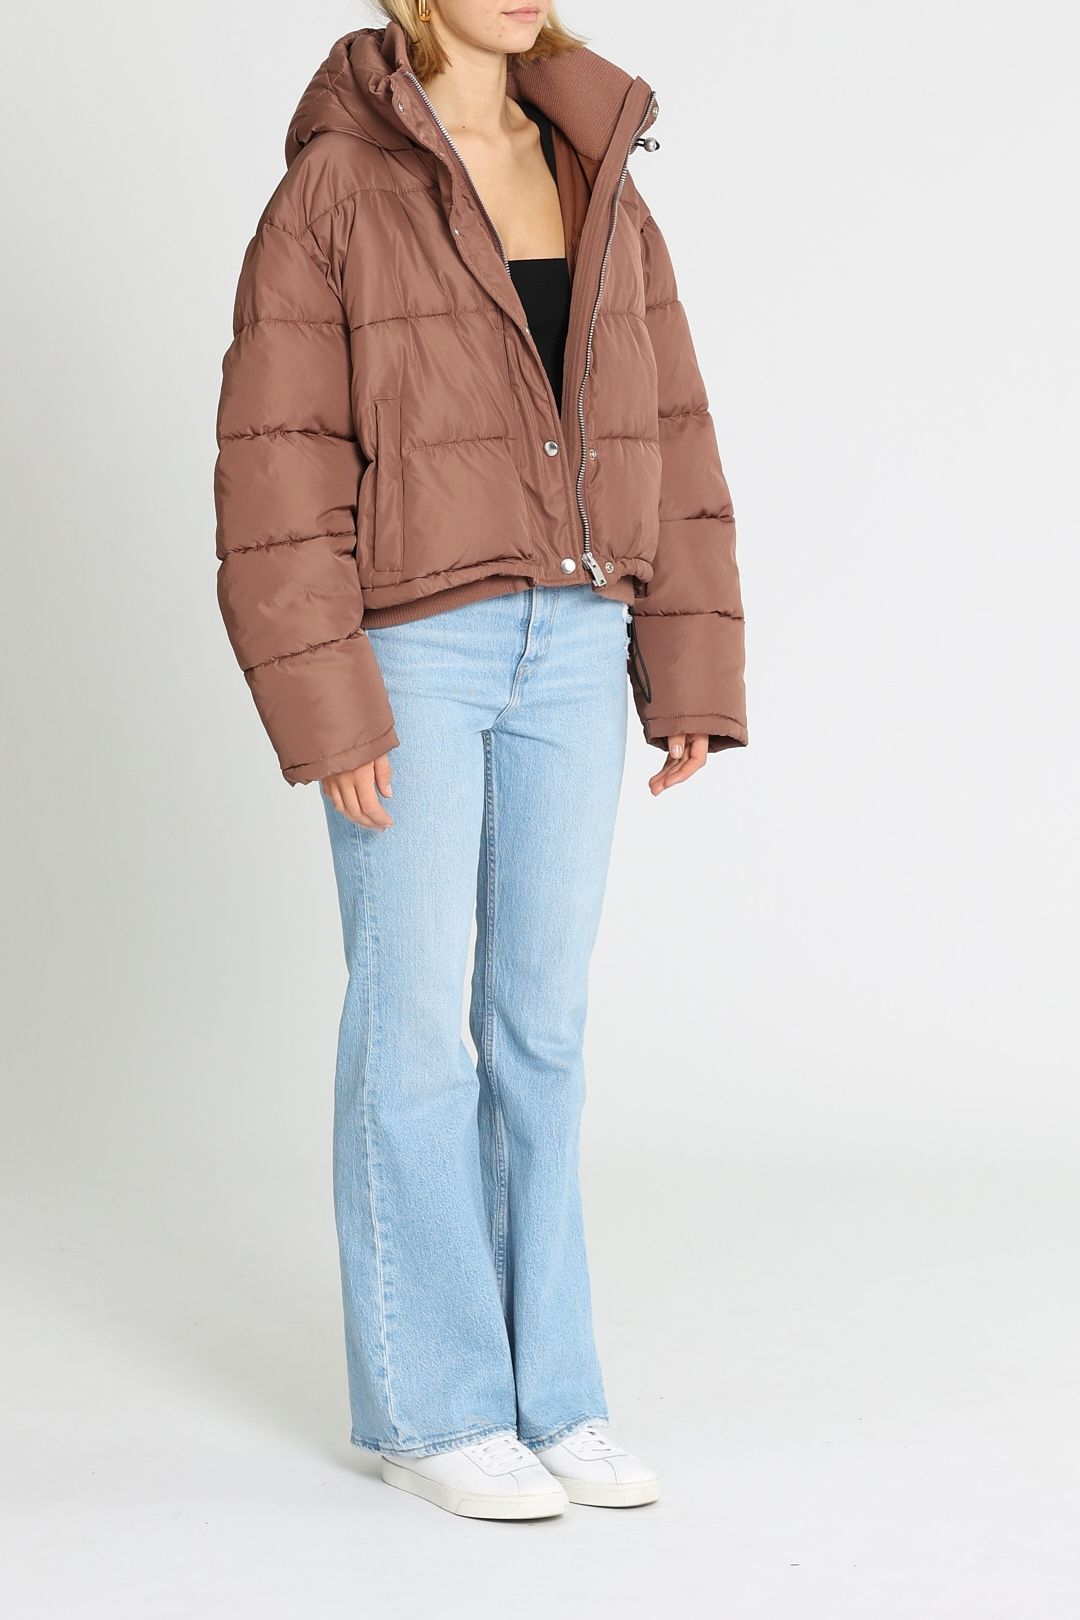 Ena Pelly Isla Cropped Puffer Jacket Coco Brown